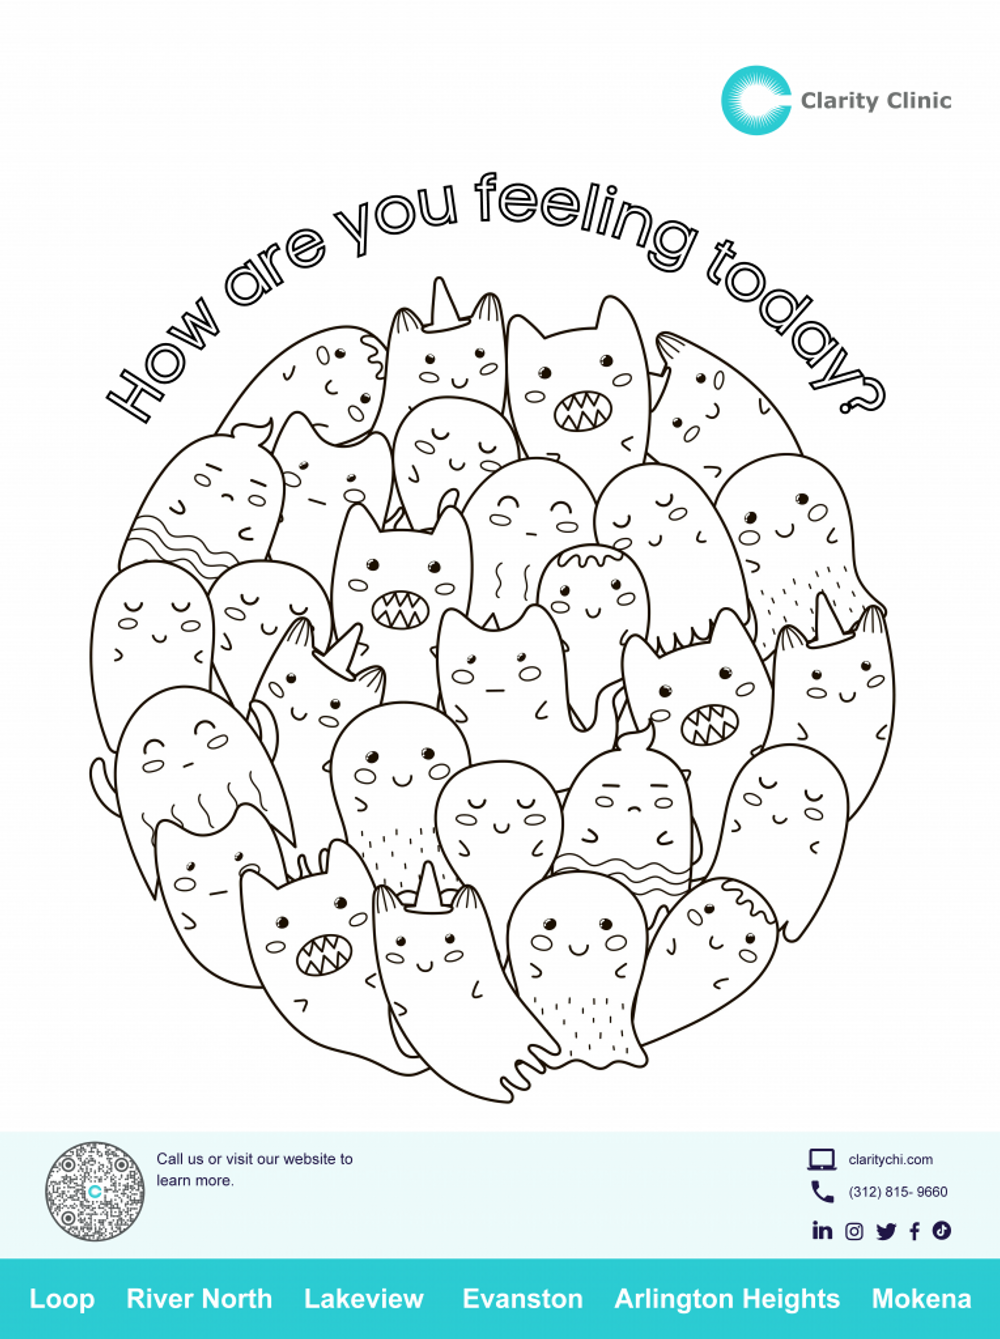 Download Coloring Pages Free From Clarity Clinic - Mental Wellness